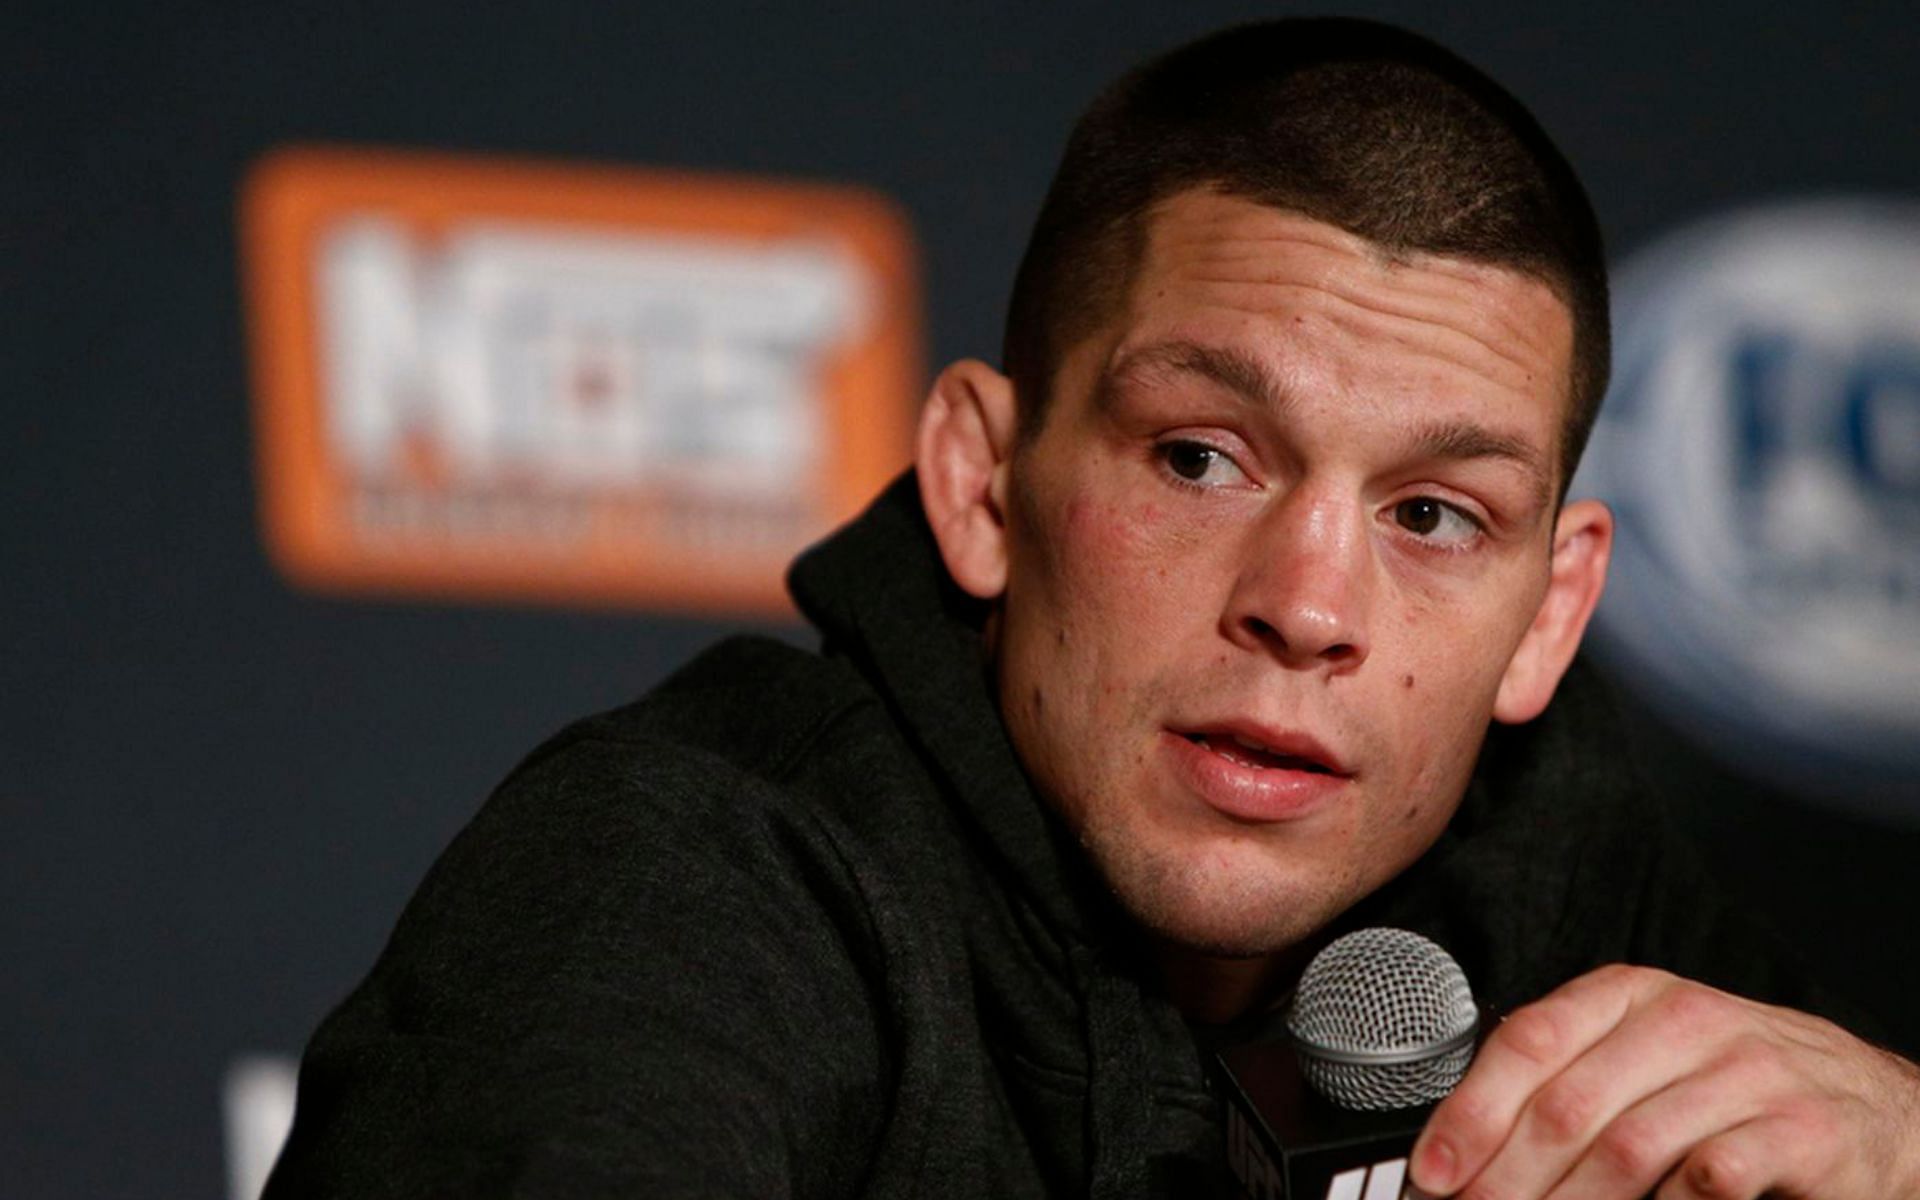 Nate Diaz talks about his next fight. (via MMAFighting)